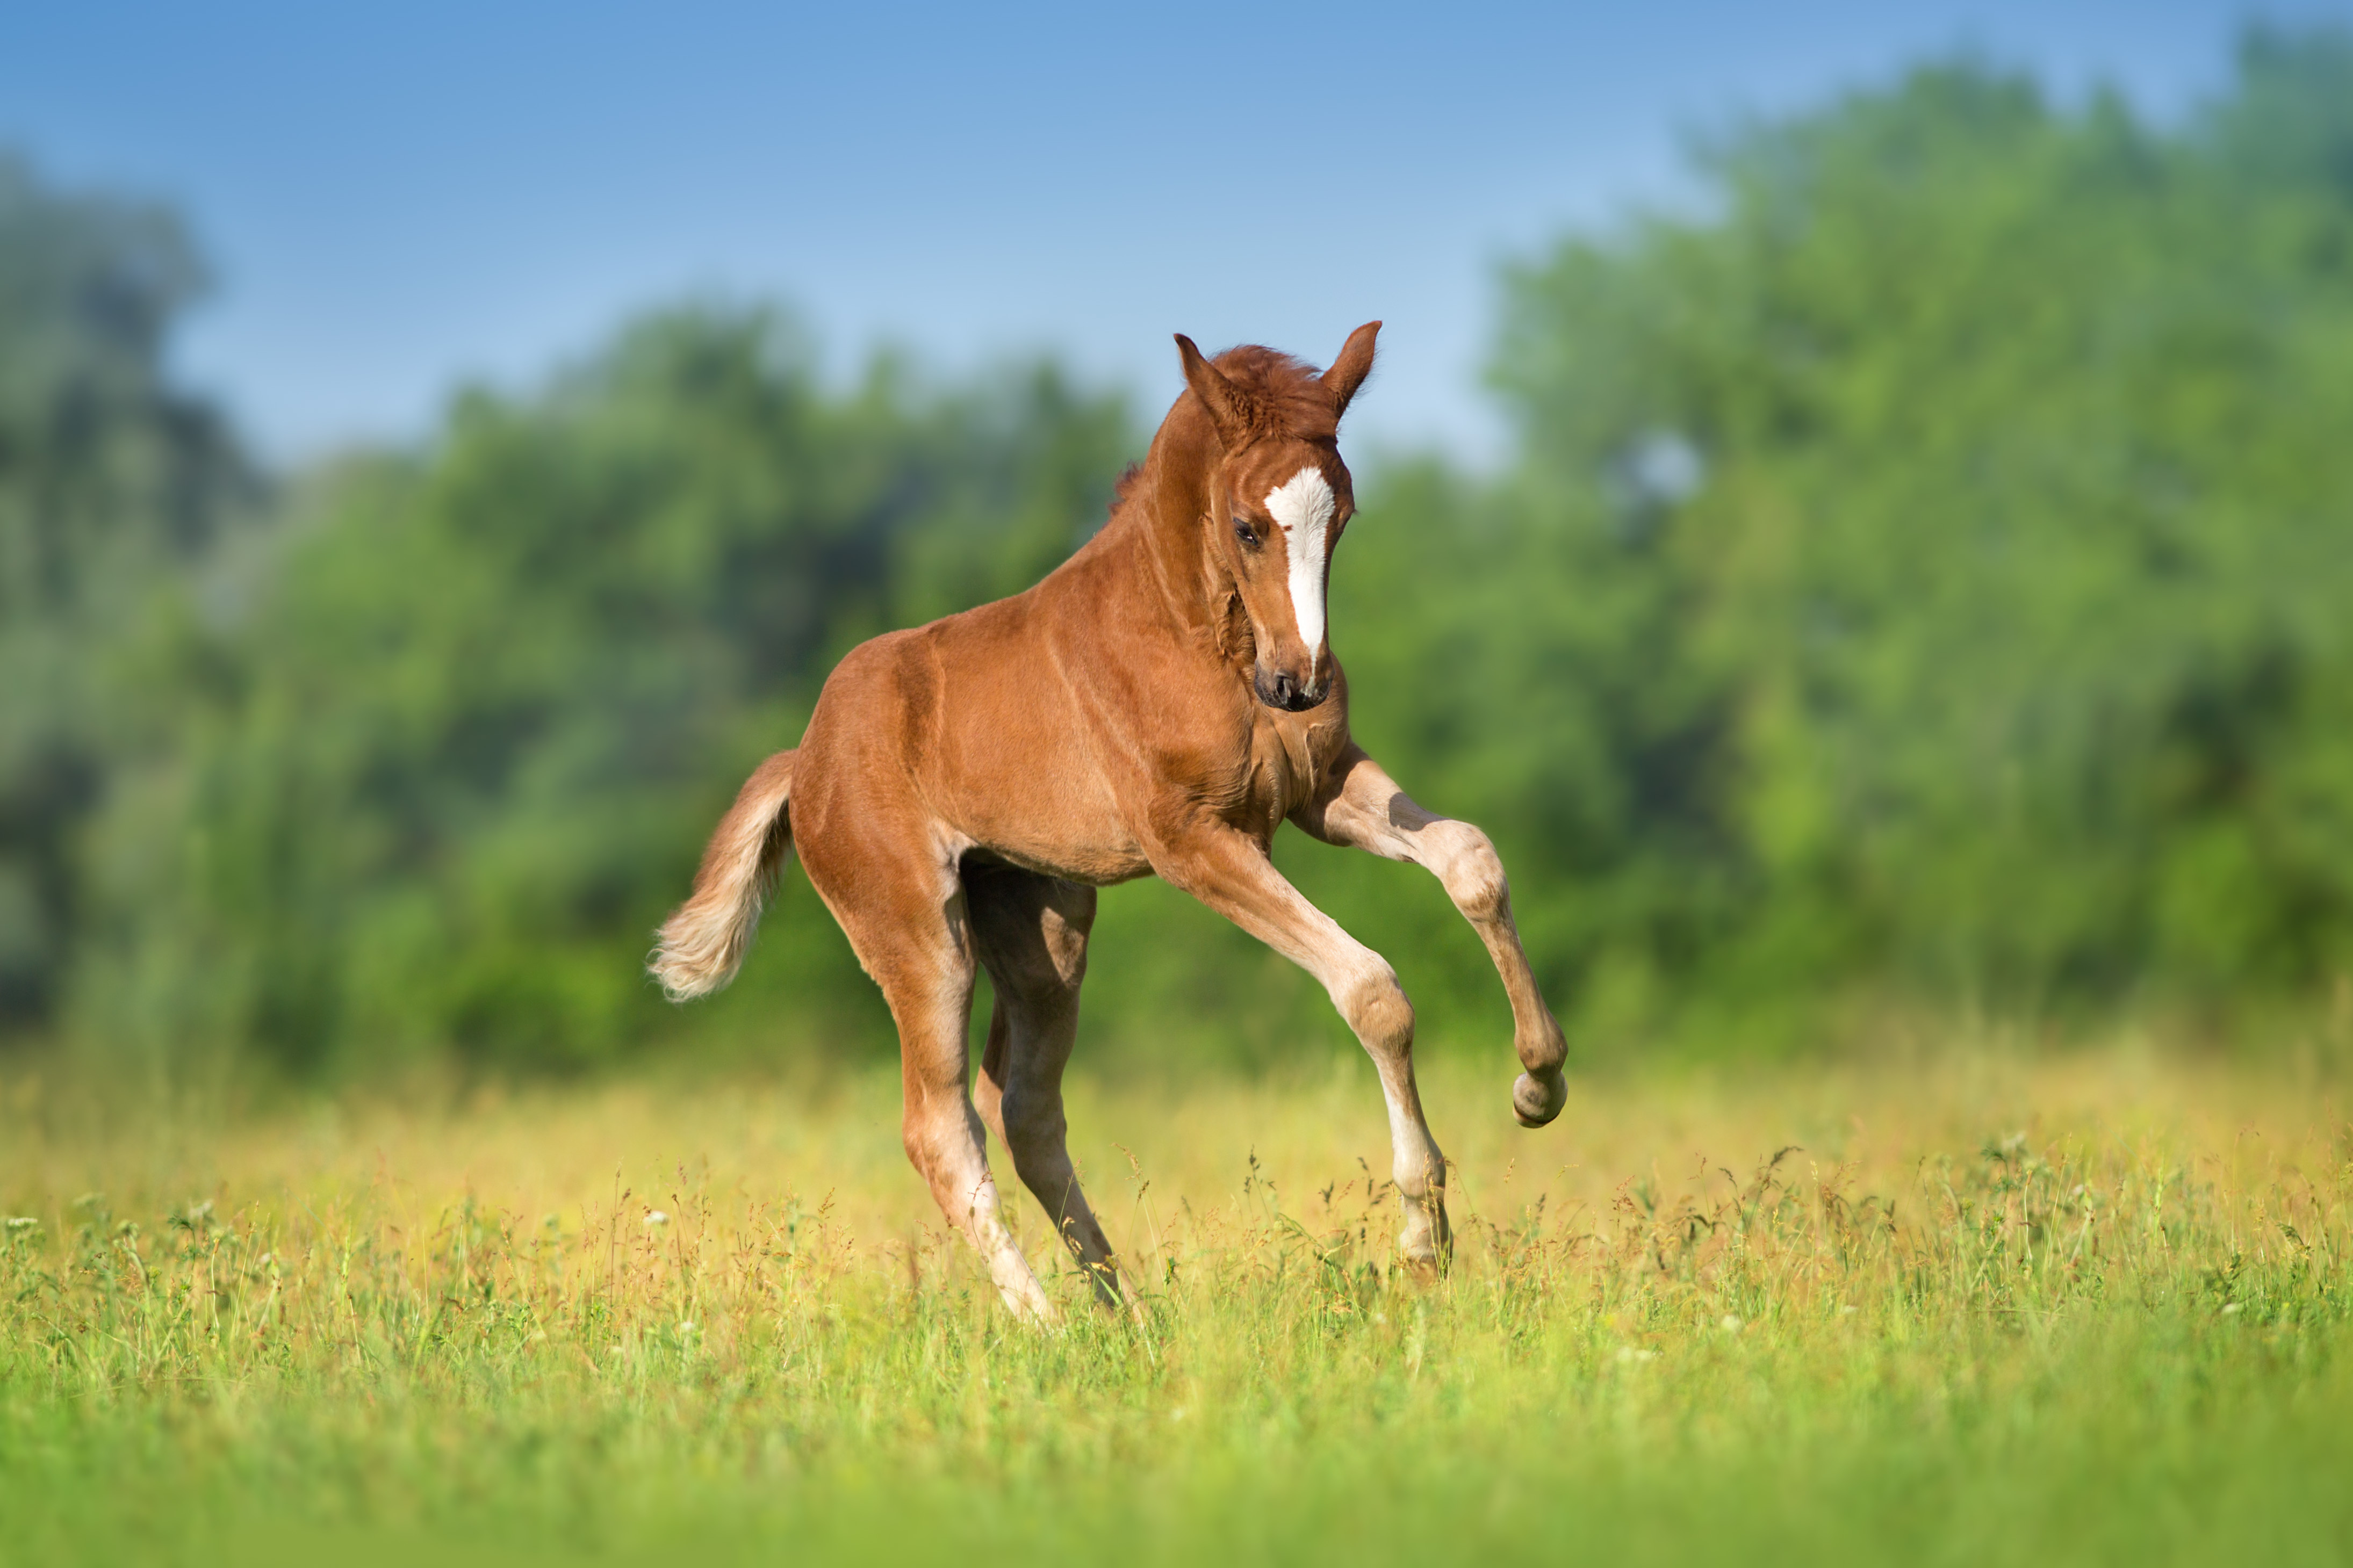 How to Quickly Treat and Prevent Foal Diarrhea